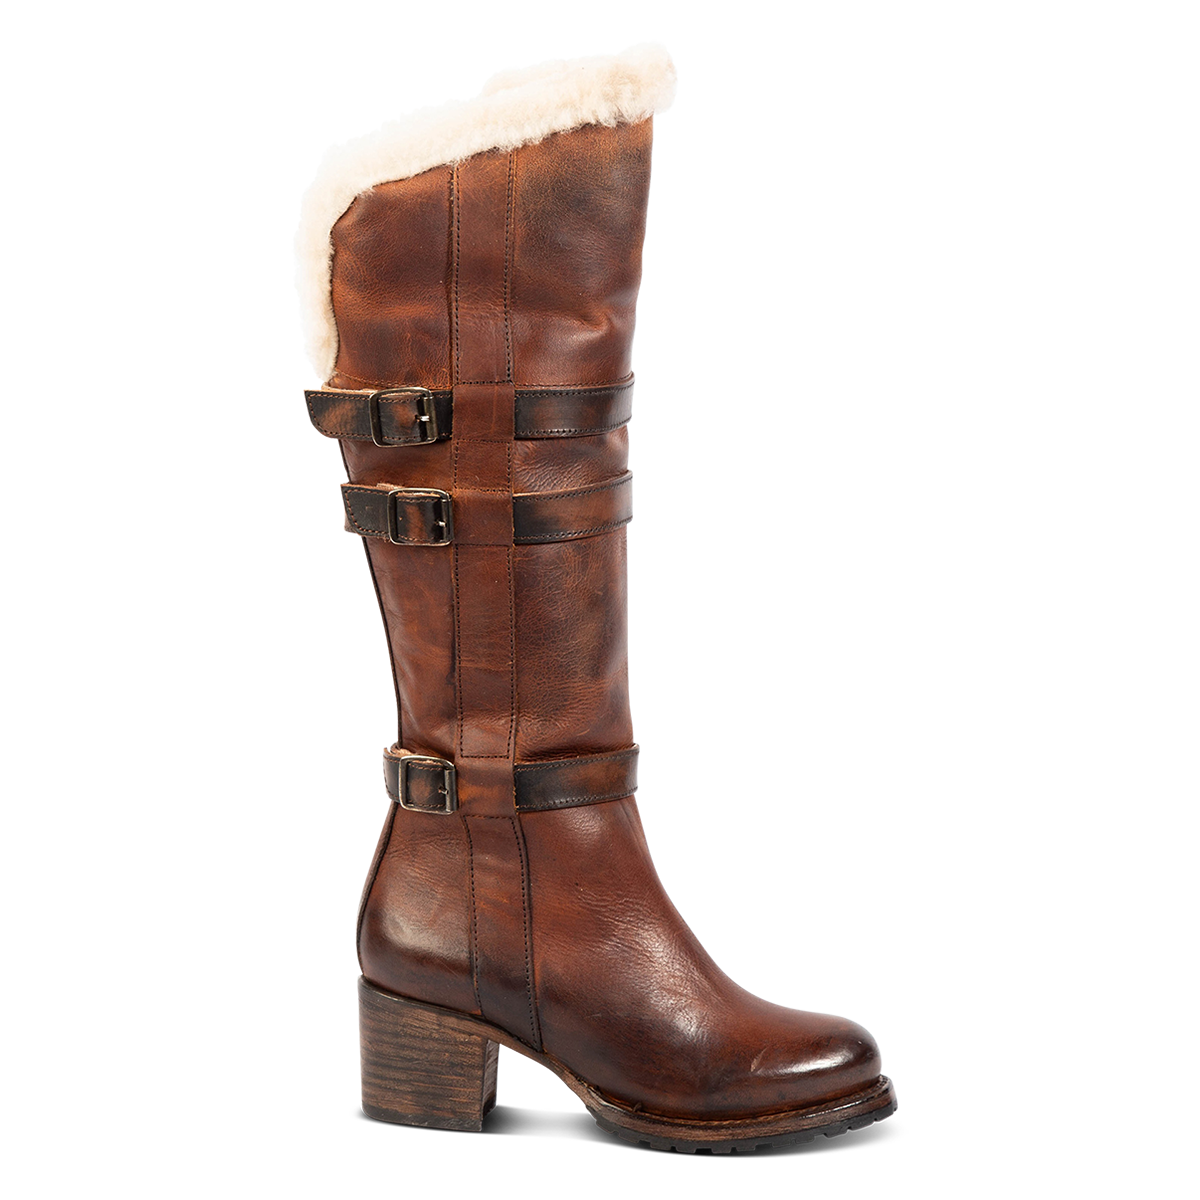 FREEBIRD women's North tan leather boot with shearling top circumference lining, full inside working brass zipper and decorative shaft belts